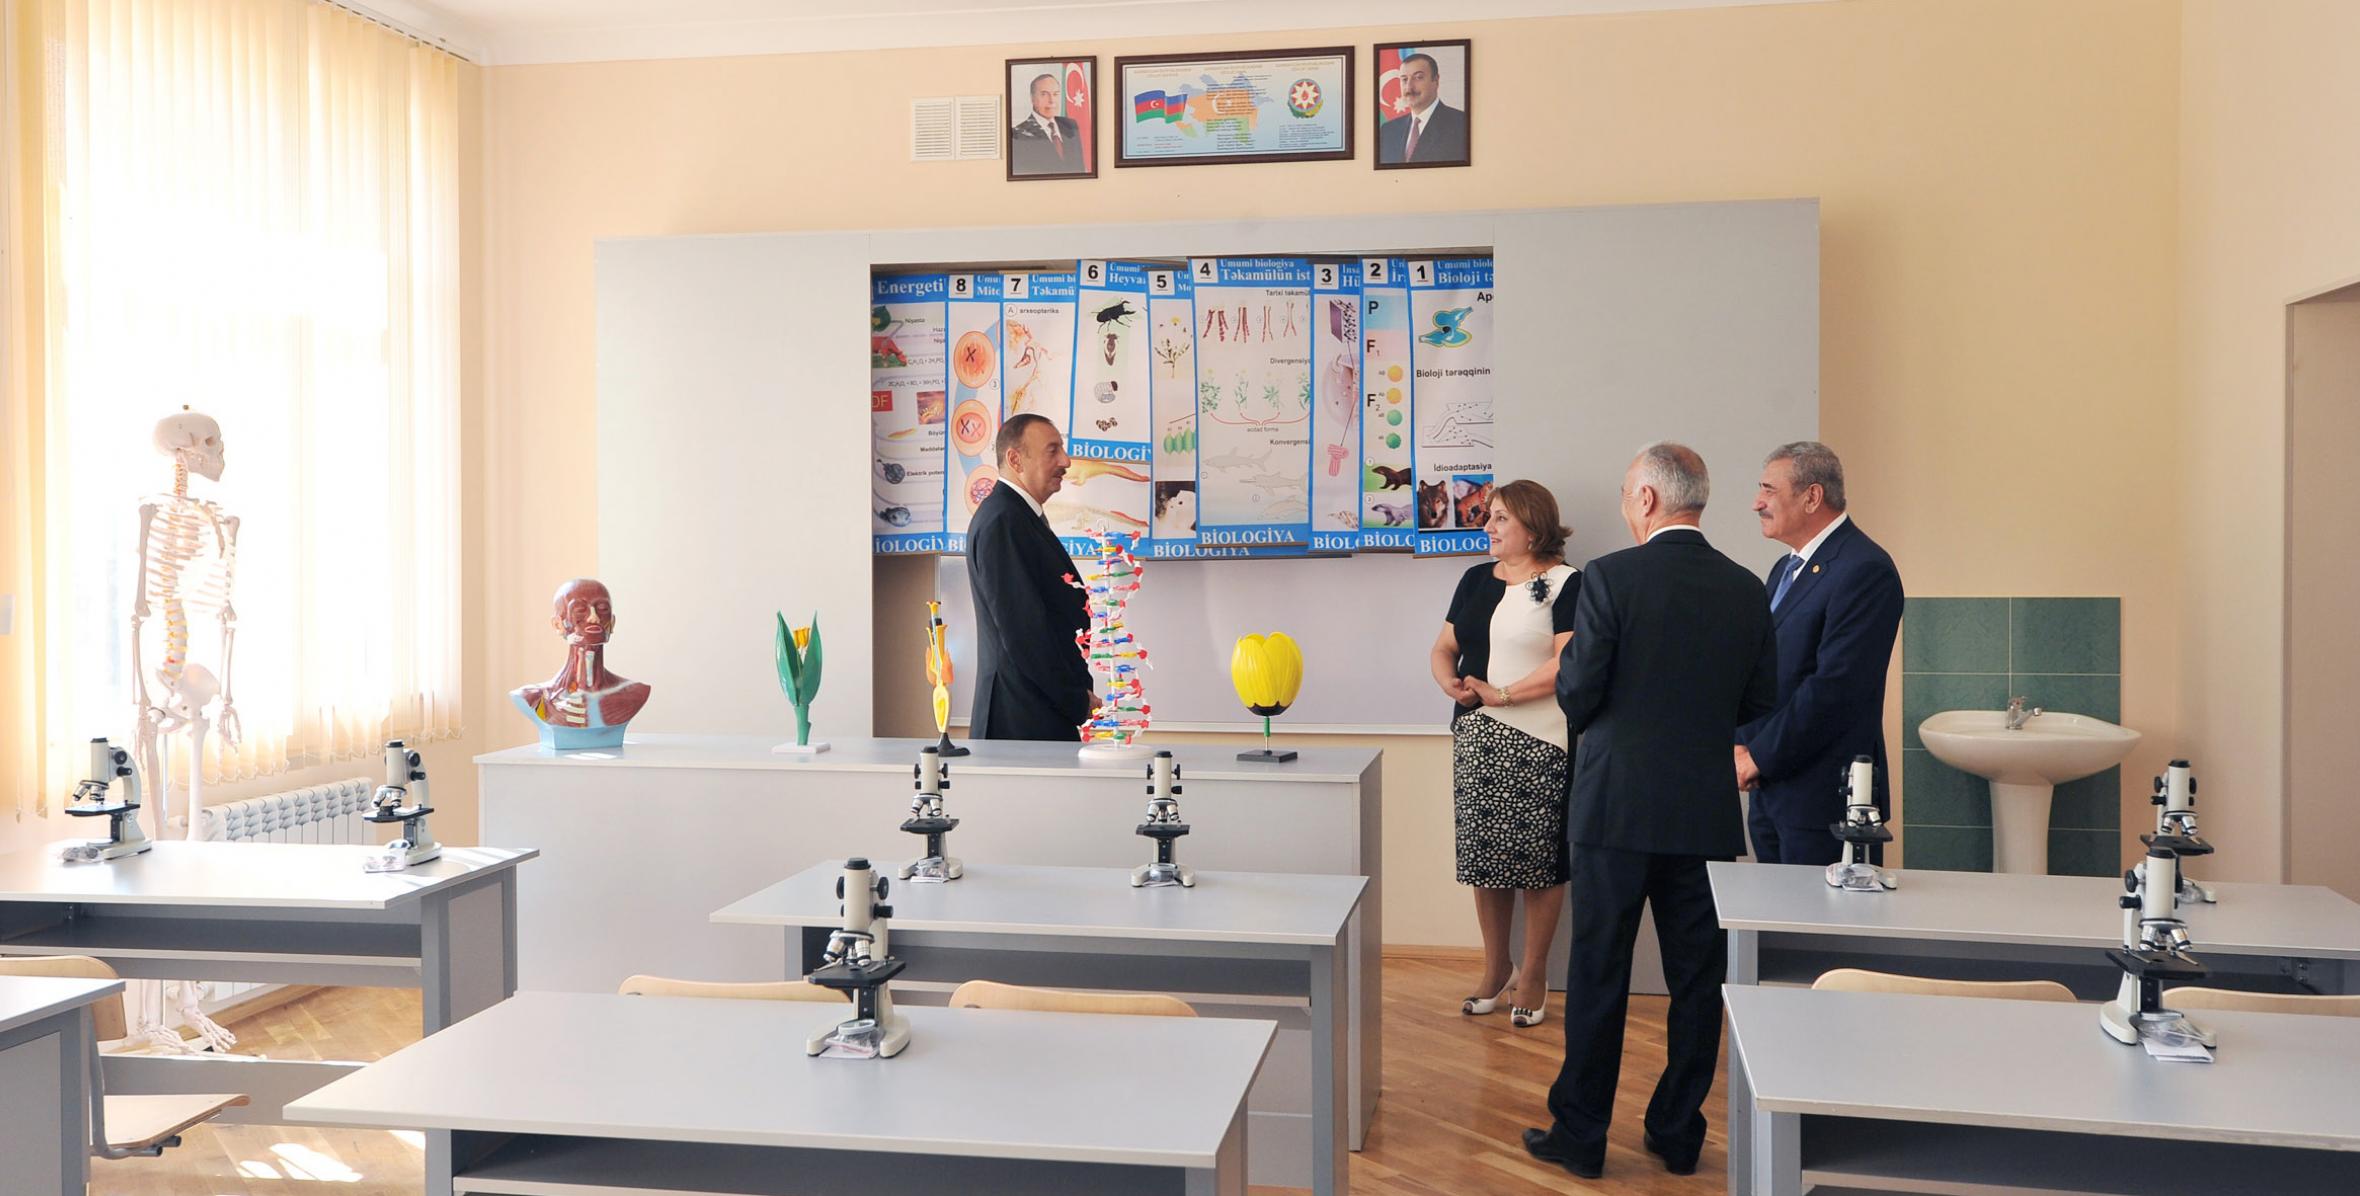 Ilham Aliyev reviewed secondary school No. 153 in Baku after major repair and reconstruction